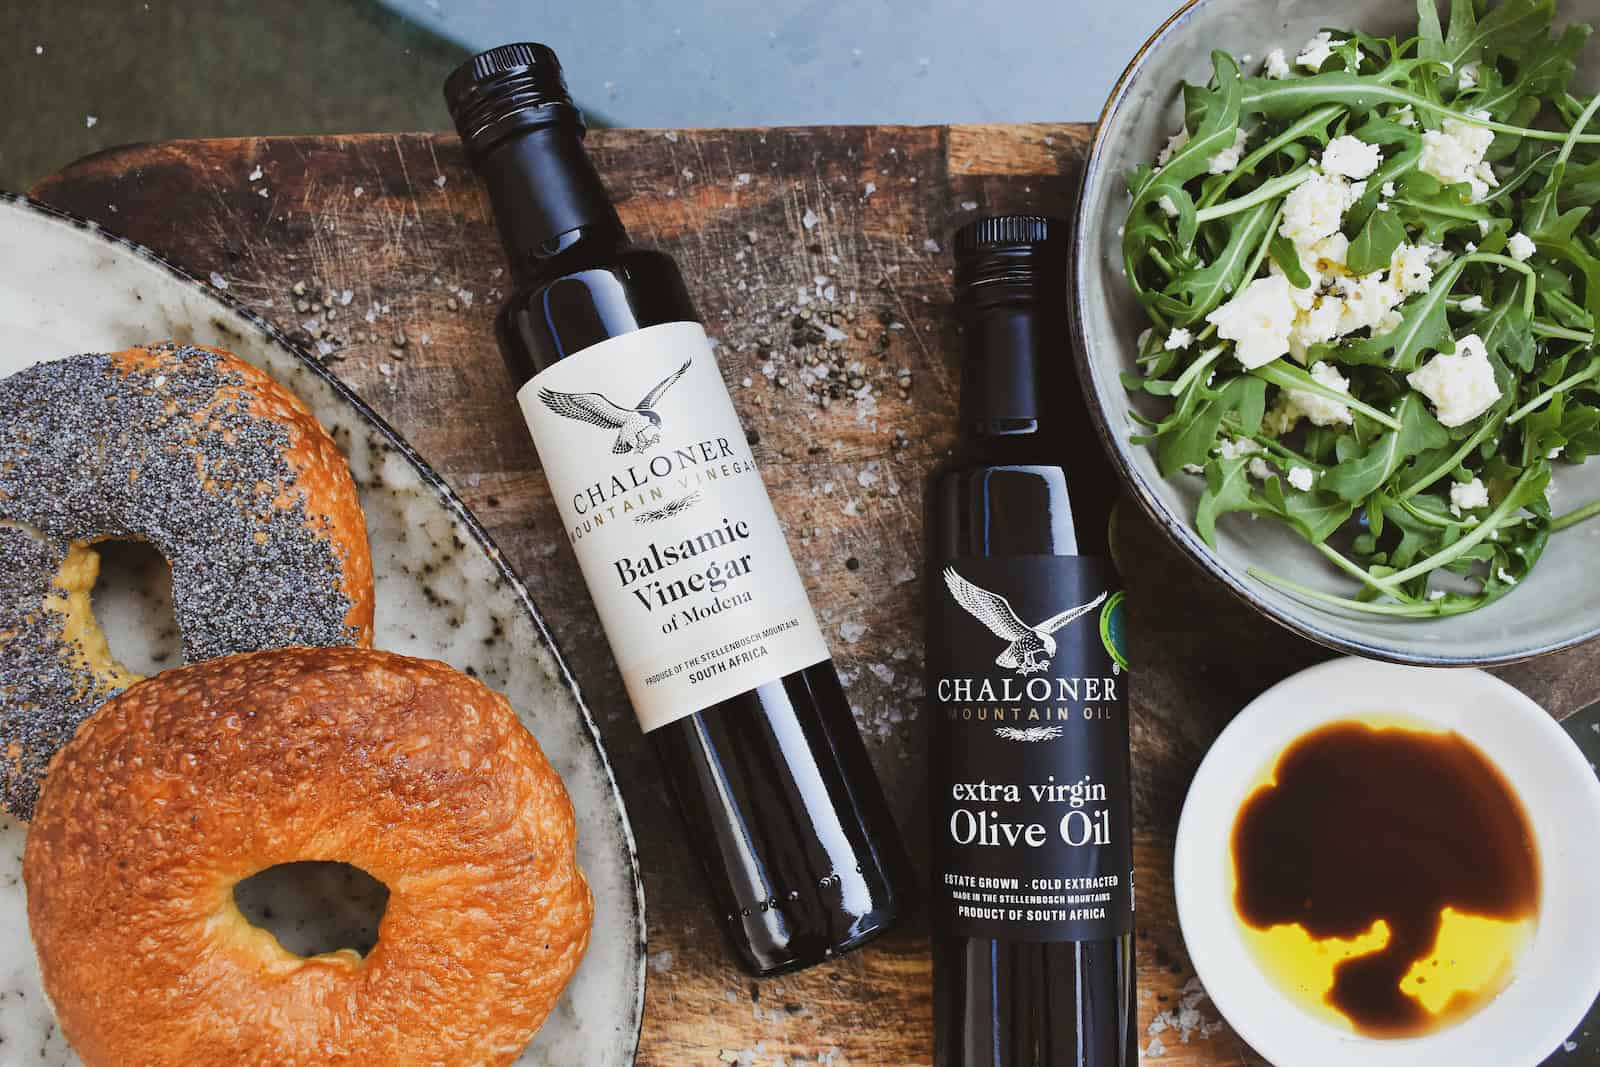 a table with Balsamic Vinegar and olive oil